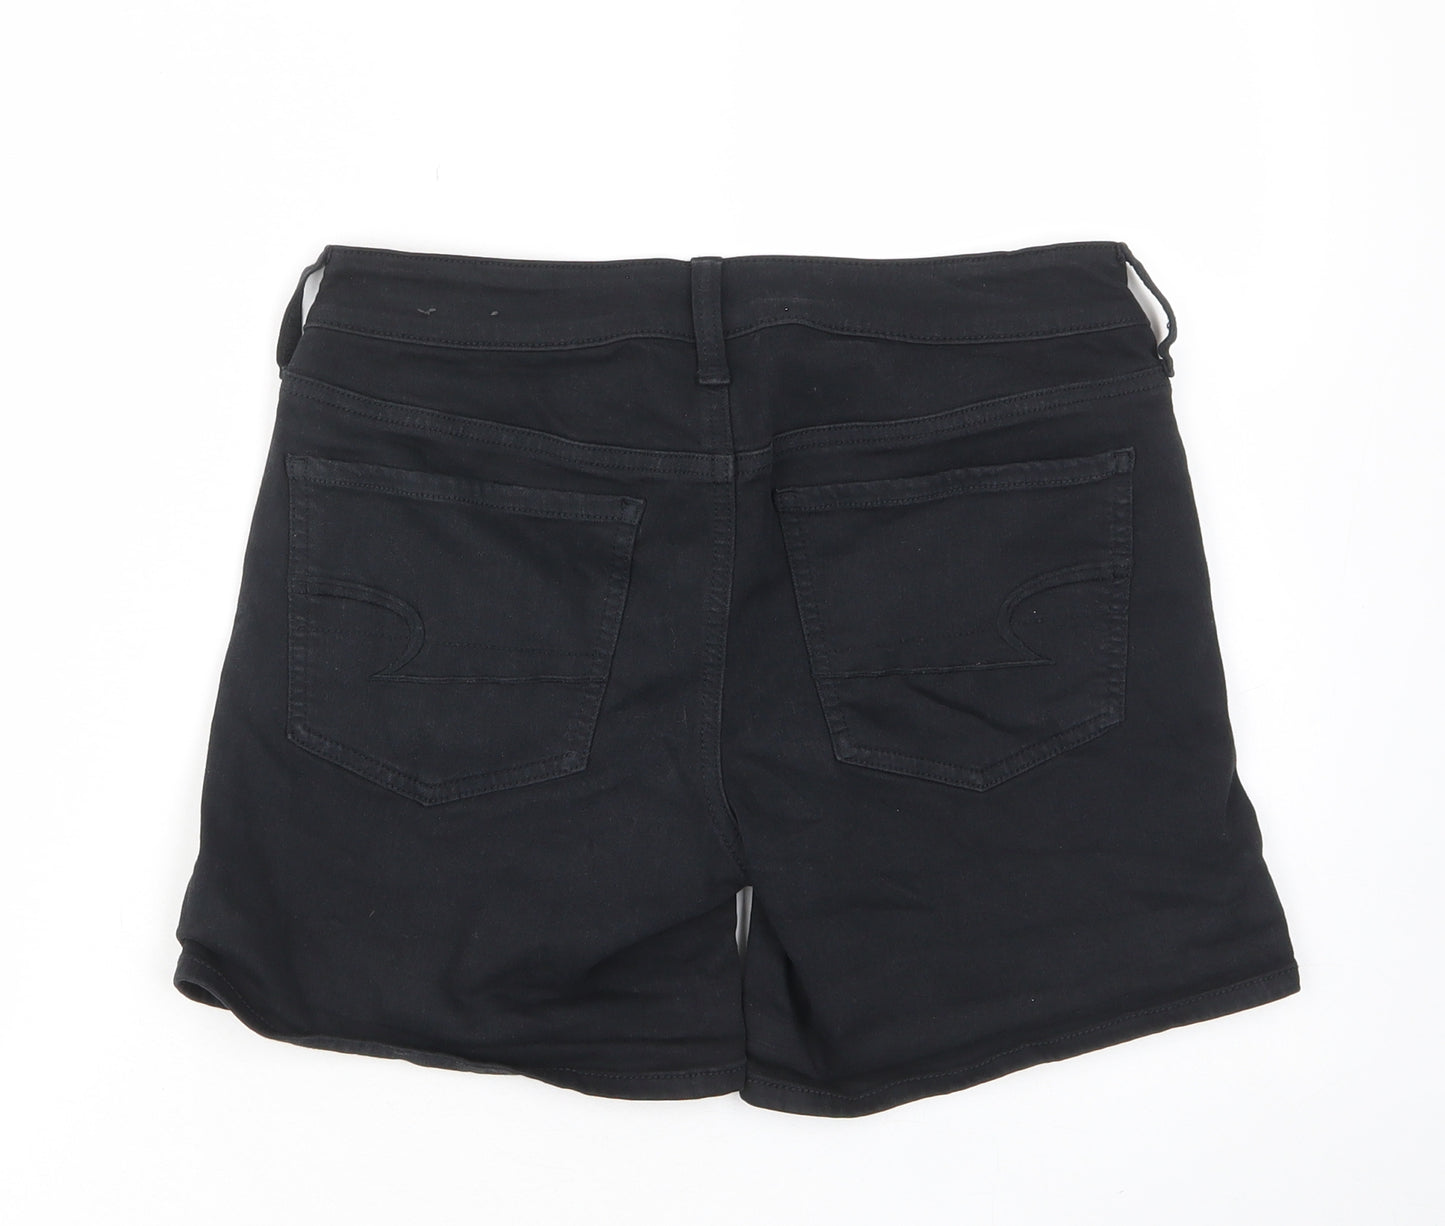 American Eagle Outfitters Womens Black Cotton Basic Shorts Size 10 L5 in Regular Zip - Pockets, Belt Loops